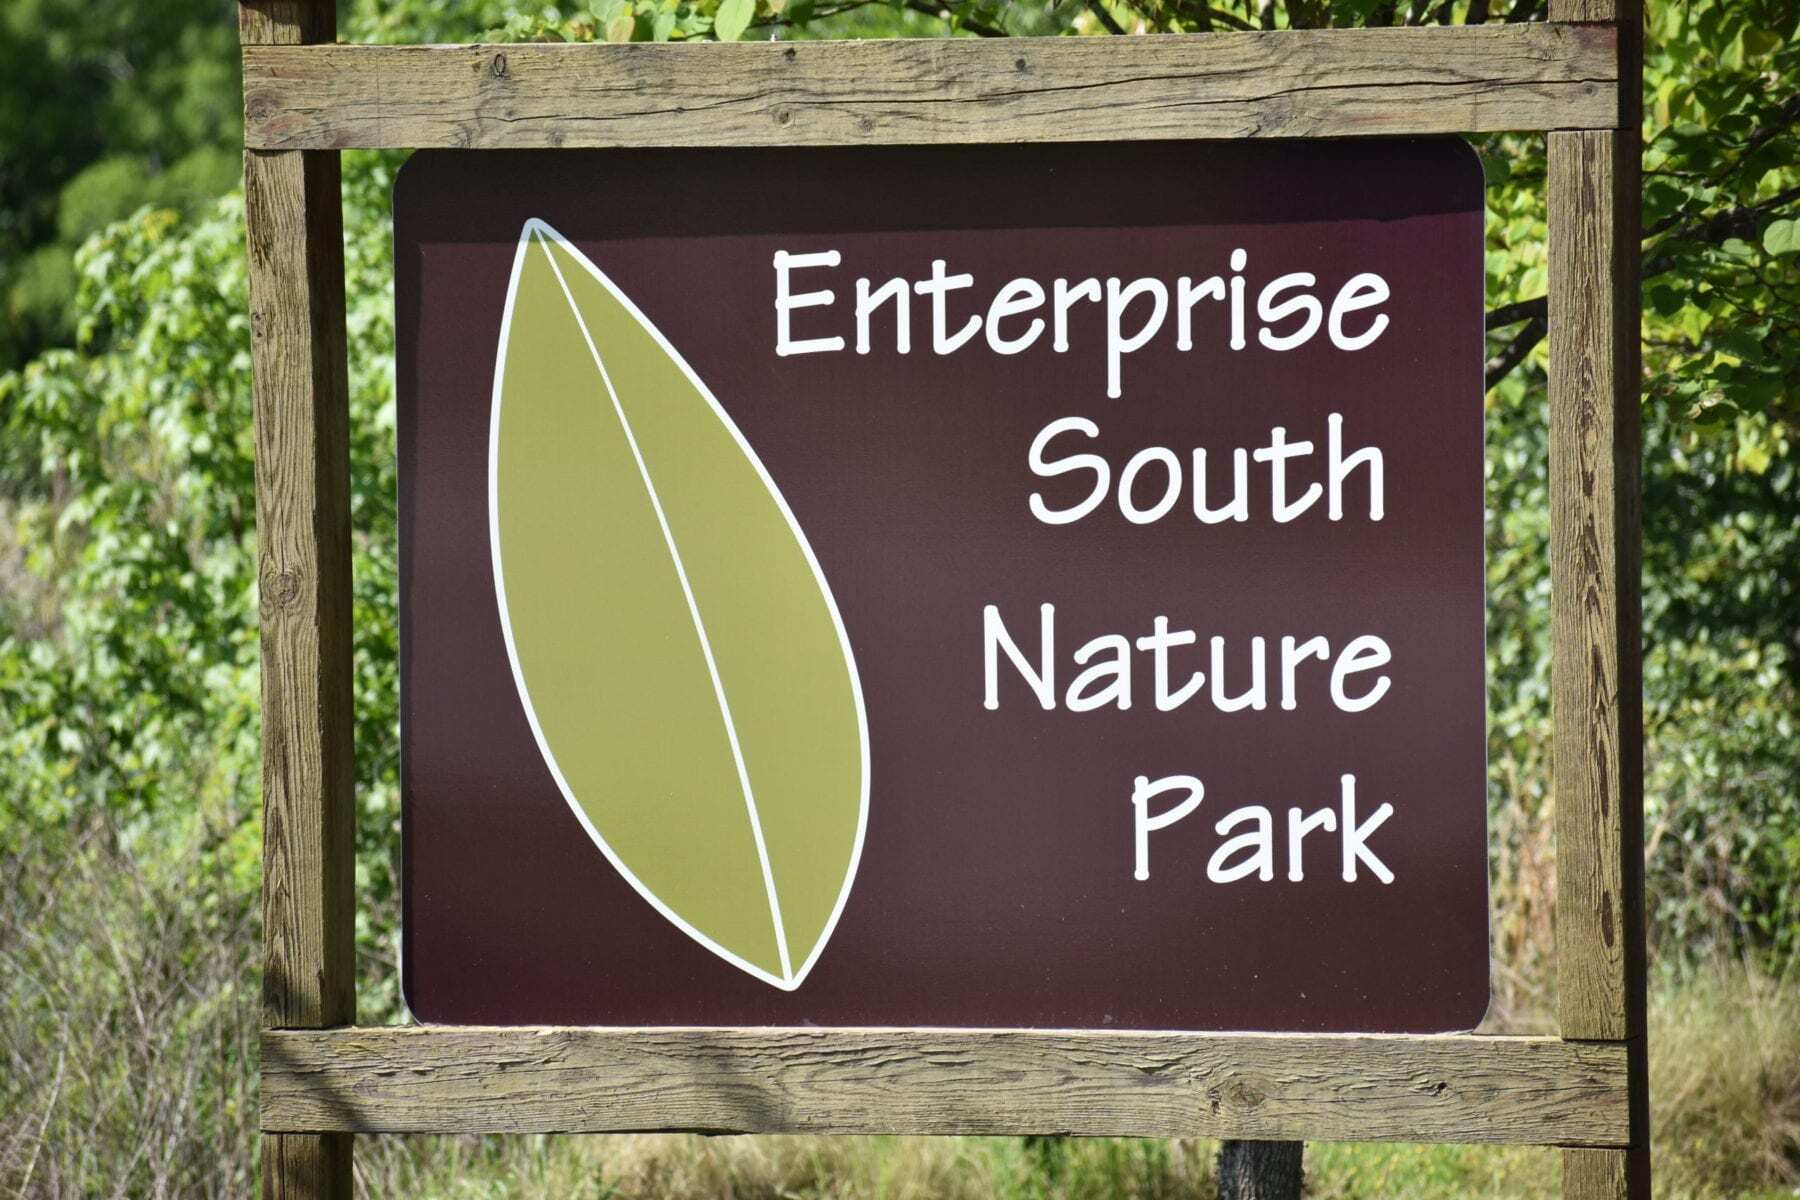 Enterprise South Nature Park in Chattanooga, TN